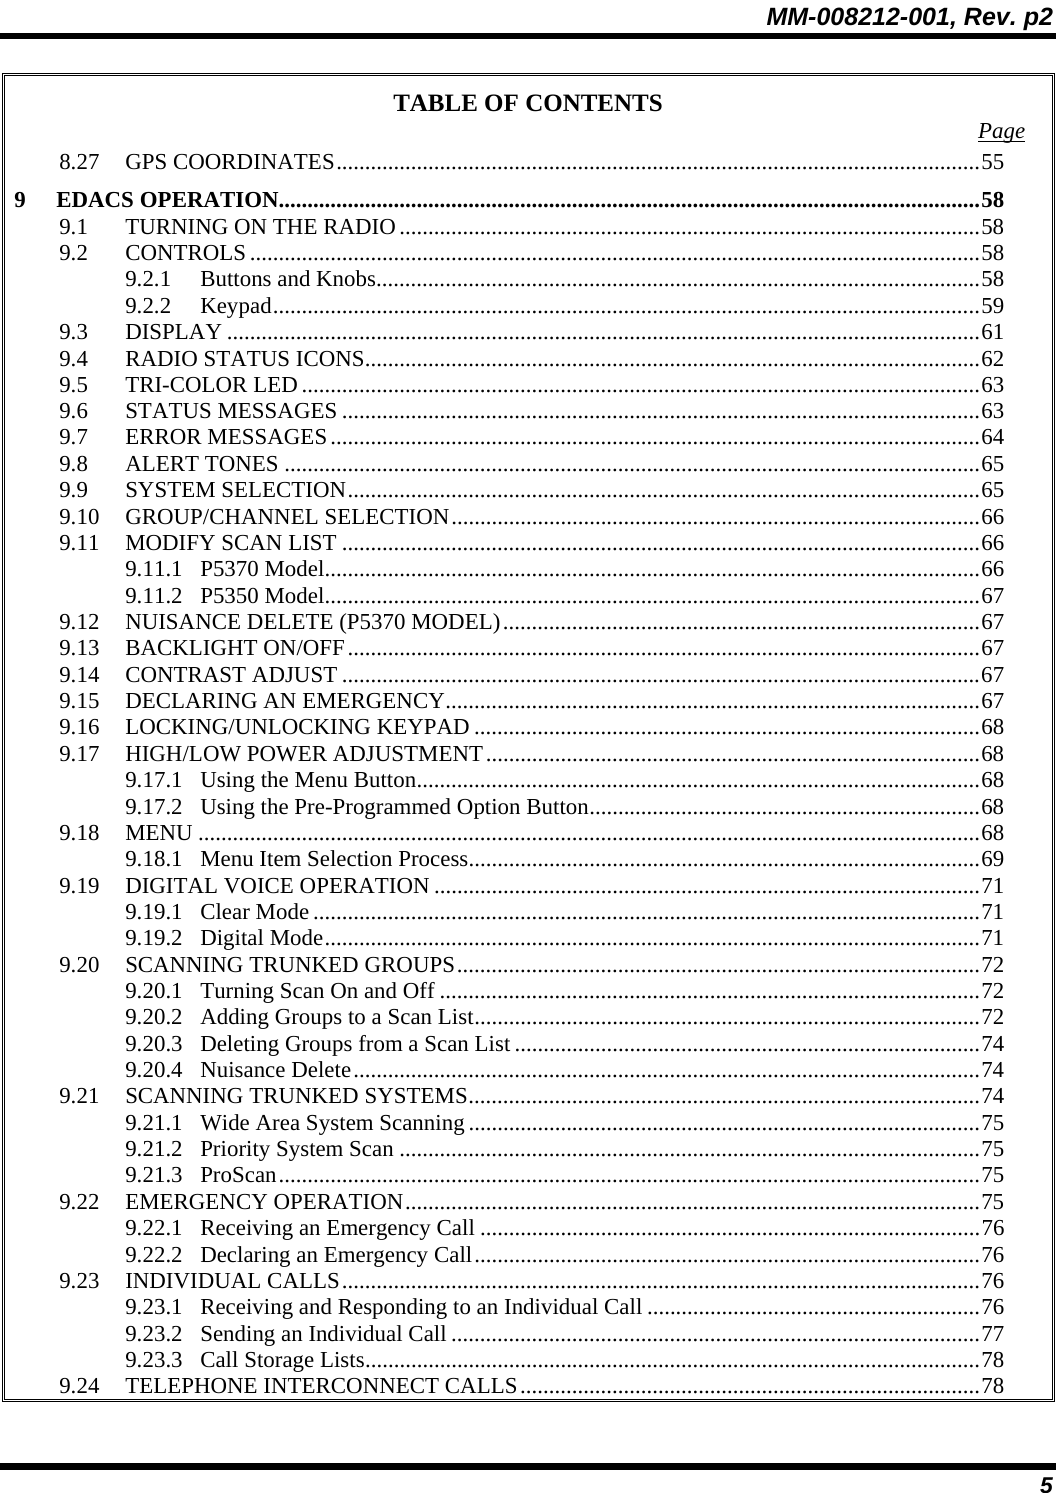 MM-008212-001, Rev. p2 5 TABLE OF CONTENTS  Page 8.27 GPS COORDINATES................................................................................................................55 9 EDACS OPERATION..........................................................................................................................58 9.1 TURNING ON THE RADIO.....................................................................................................58 9.2 CONTROLS...............................................................................................................................58 9.2.1 Buttons and Knobs.........................................................................................................58 9.2.2 Keypad...........................................................................................................................59 9.3 DISPLAY ...................................................................................................................................61 9.4 RADIO STATUS ICONS...........................................................................................................62 9.5 TRI-COLOR LED......................................................................................................................63 9.6 STATUS MESSAGES ...............................................................................................................63 9.7 ERROR MESSAGES.................................................................................................................64 9.8 ALERT TONES .........................................................................................................................65 9.9 SYSTEM SELECTION..............................................................................................................65 9.10 GROUP/CHANNEL SELECTION............................................................................................66 9.11 MODIFY SCAN LIST ...............................................................................................................66 9.11.1 P5370 Model..................................................................................................................66 9.11.2 P5350 Model..................................................................................................................67 9.12 NUISANCE DELETE (P5370 MODEL)...................................................................................67 9.13 BACKLIGHT ON/OFF..............................................................................................................67 9.14 CONTRAST ADJUST ...............................................................................................................67 9.15 DECLARING AN EMERGENCY.............................................................................................67 9.16 LOCKING/UNLOCKING KEYPAD ........................................................................................68 9.17 HIGH/LOW POWER ADJUSTMENT......................................................................................68 9.17.1 Using the Menu Button..................................................................................................68 9.17.2 Using the Pre-Programmed Option Button....................................................................68 9.18 MENU ........................................................................................................................................68 9.18.1 Menu Item Selection Process.........................................................................................69 9.19 DIGITAL VOICE OPERATION ...............................................................................................71 9.19.1 Clear Mode....................................................................................................................71 9.19.2 Digital Mode..................................................................................................................71 9.20 SCANNING TRUNKED GROUPS...........................................................................................72 9.20.1 Turning Scan On and Off ..............................................................................................72 9.20.2 Adding Groups to a Scan List........................................................................................72 9.20.3 Deleting Groups from a Scan List.................................................................................74 9.20.4 Nuisance Delete.............................................................................................................74 9.21 SCANNING TRUNKED SYSTEMS.........................................................................................74 9.21.1 Wide Area System Scanning.........................................................................................75 9.21.2 Priority System Scan .....................................................................................................75 9.21.3 ProScan..........................................................................................................................75 9.22 EMERGENCY OPERATION....................................................................................................75 9.22.1 Receiving an Emergency Call .......................................................................................76 9.22.2 Declaring an Emergency Call........................................................................................76 9.23 INDIVIDUAL CALLS...............................................................................................................76 9.23.1 Receiving and Responding to an Individual Call ..........................................................76 9.23.2 Sending an Individual Call ............................................................................................77 9.23.3 Call Storage Lists...........................................................................................................78 9.24 TELEPHONE INTERCONNECT CALLS................................................................................78 